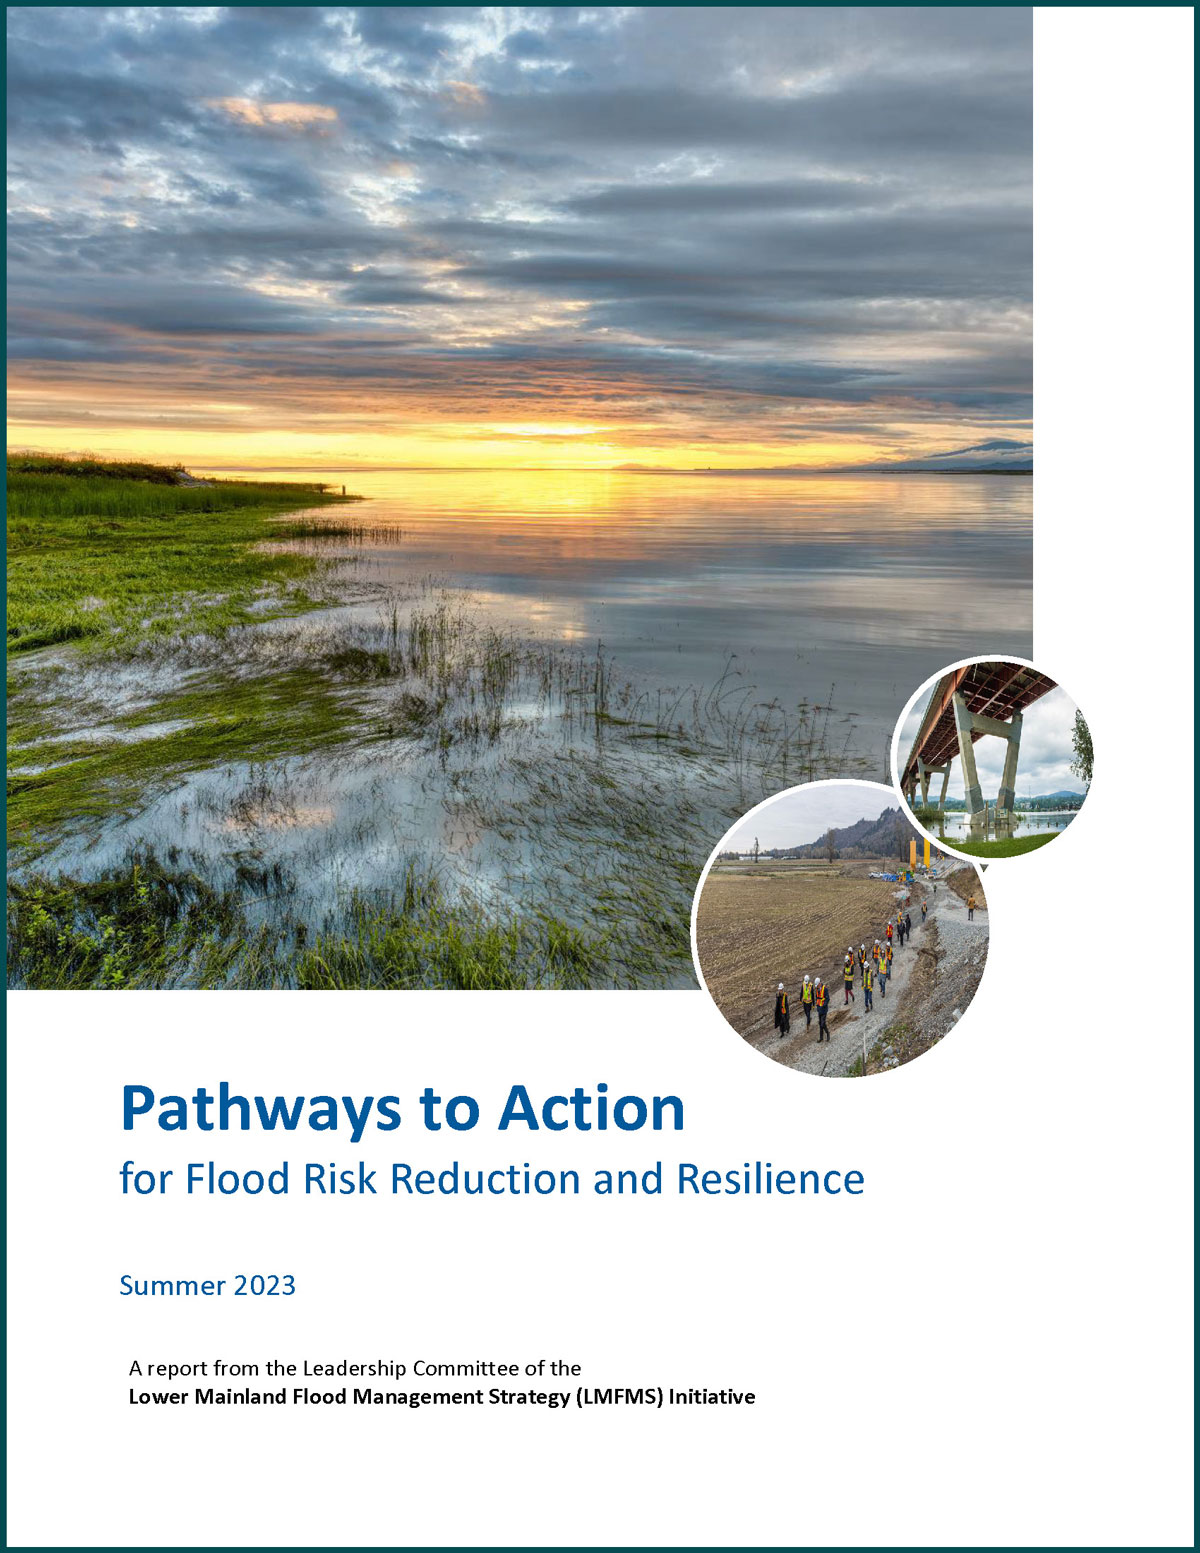 Pathways to Action report